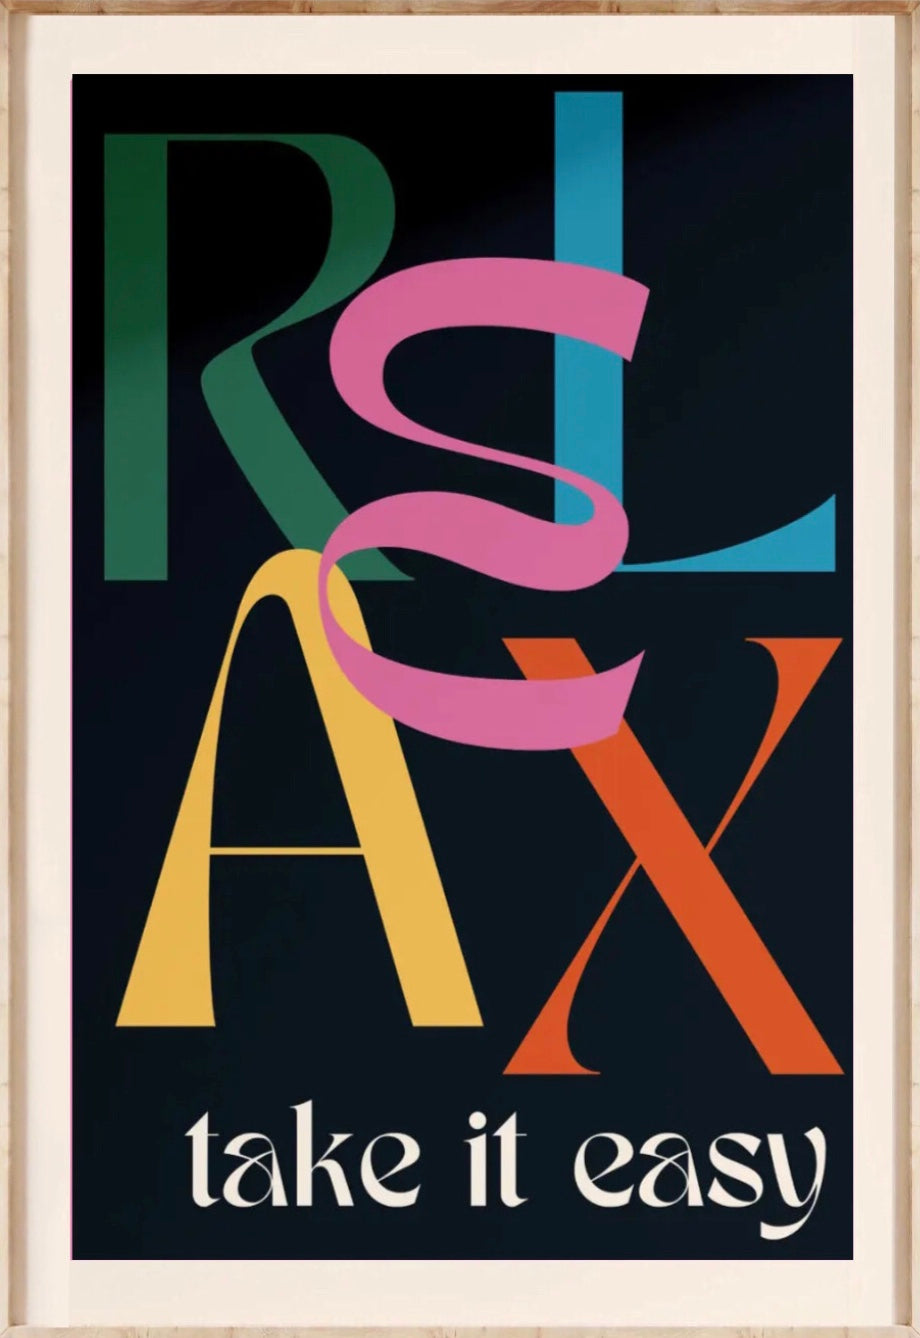 "relax take it easy" poster